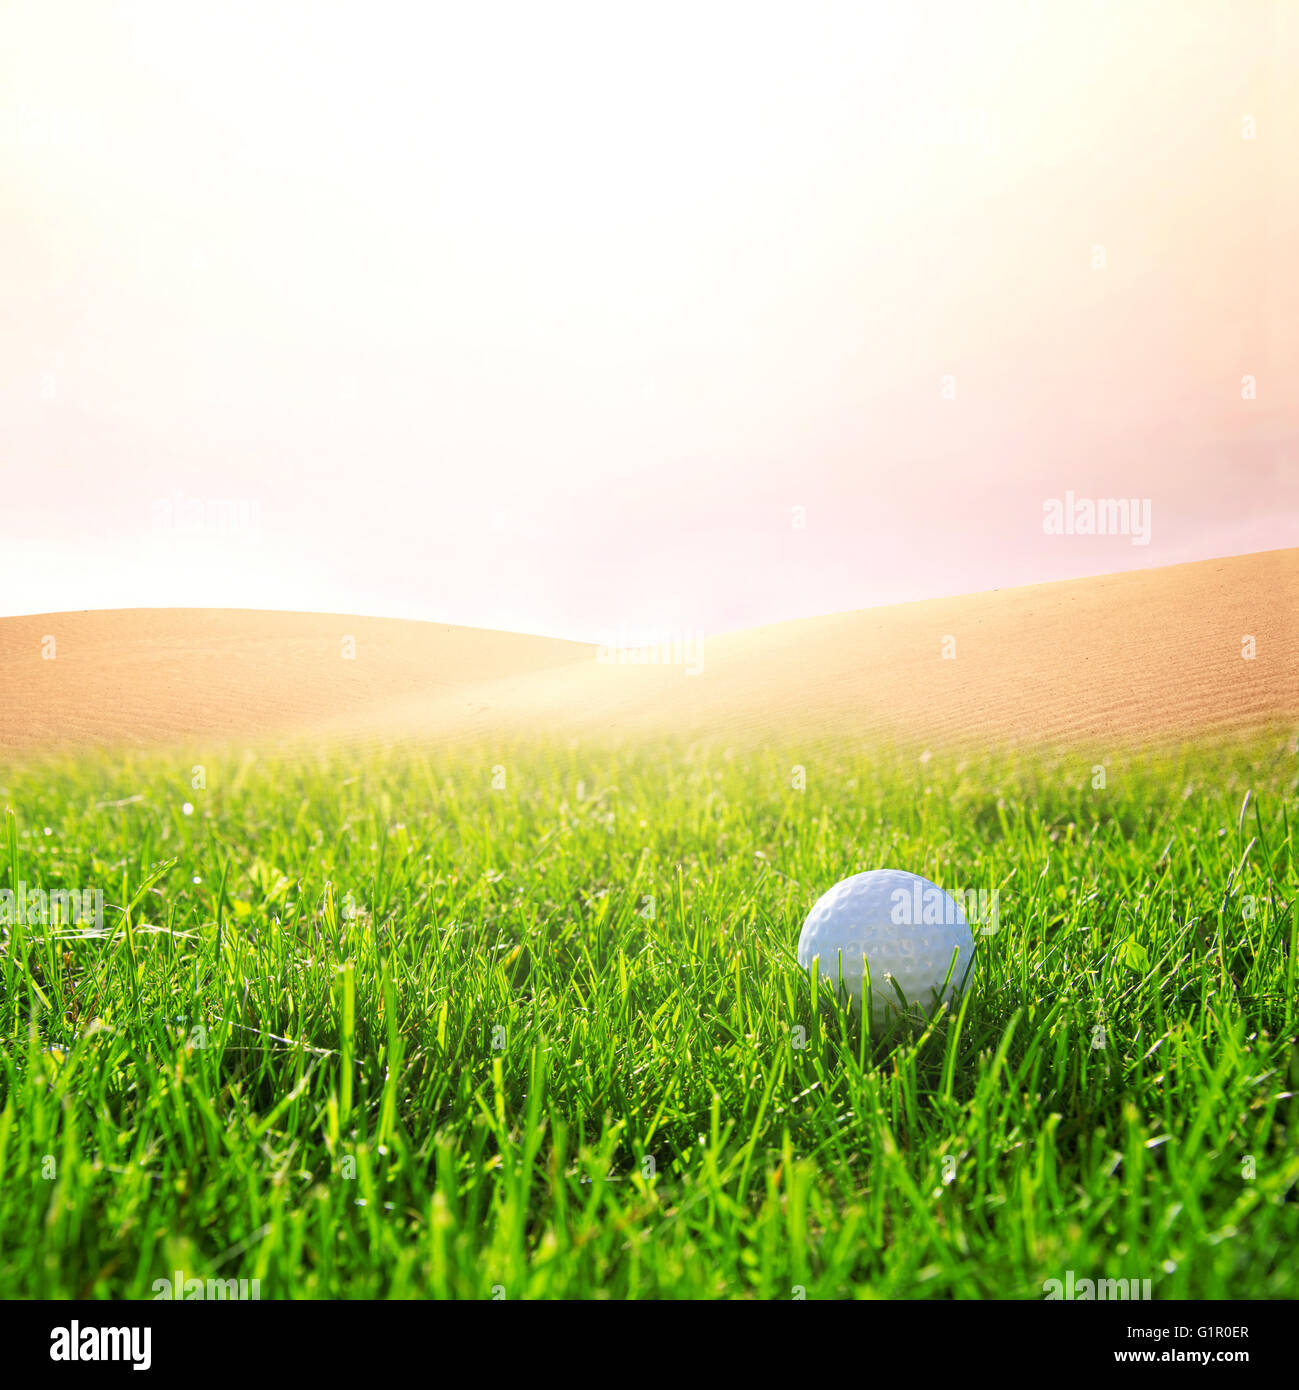 Golfball in the green grass on the golf course. Sport conceptual image. Stock Photo